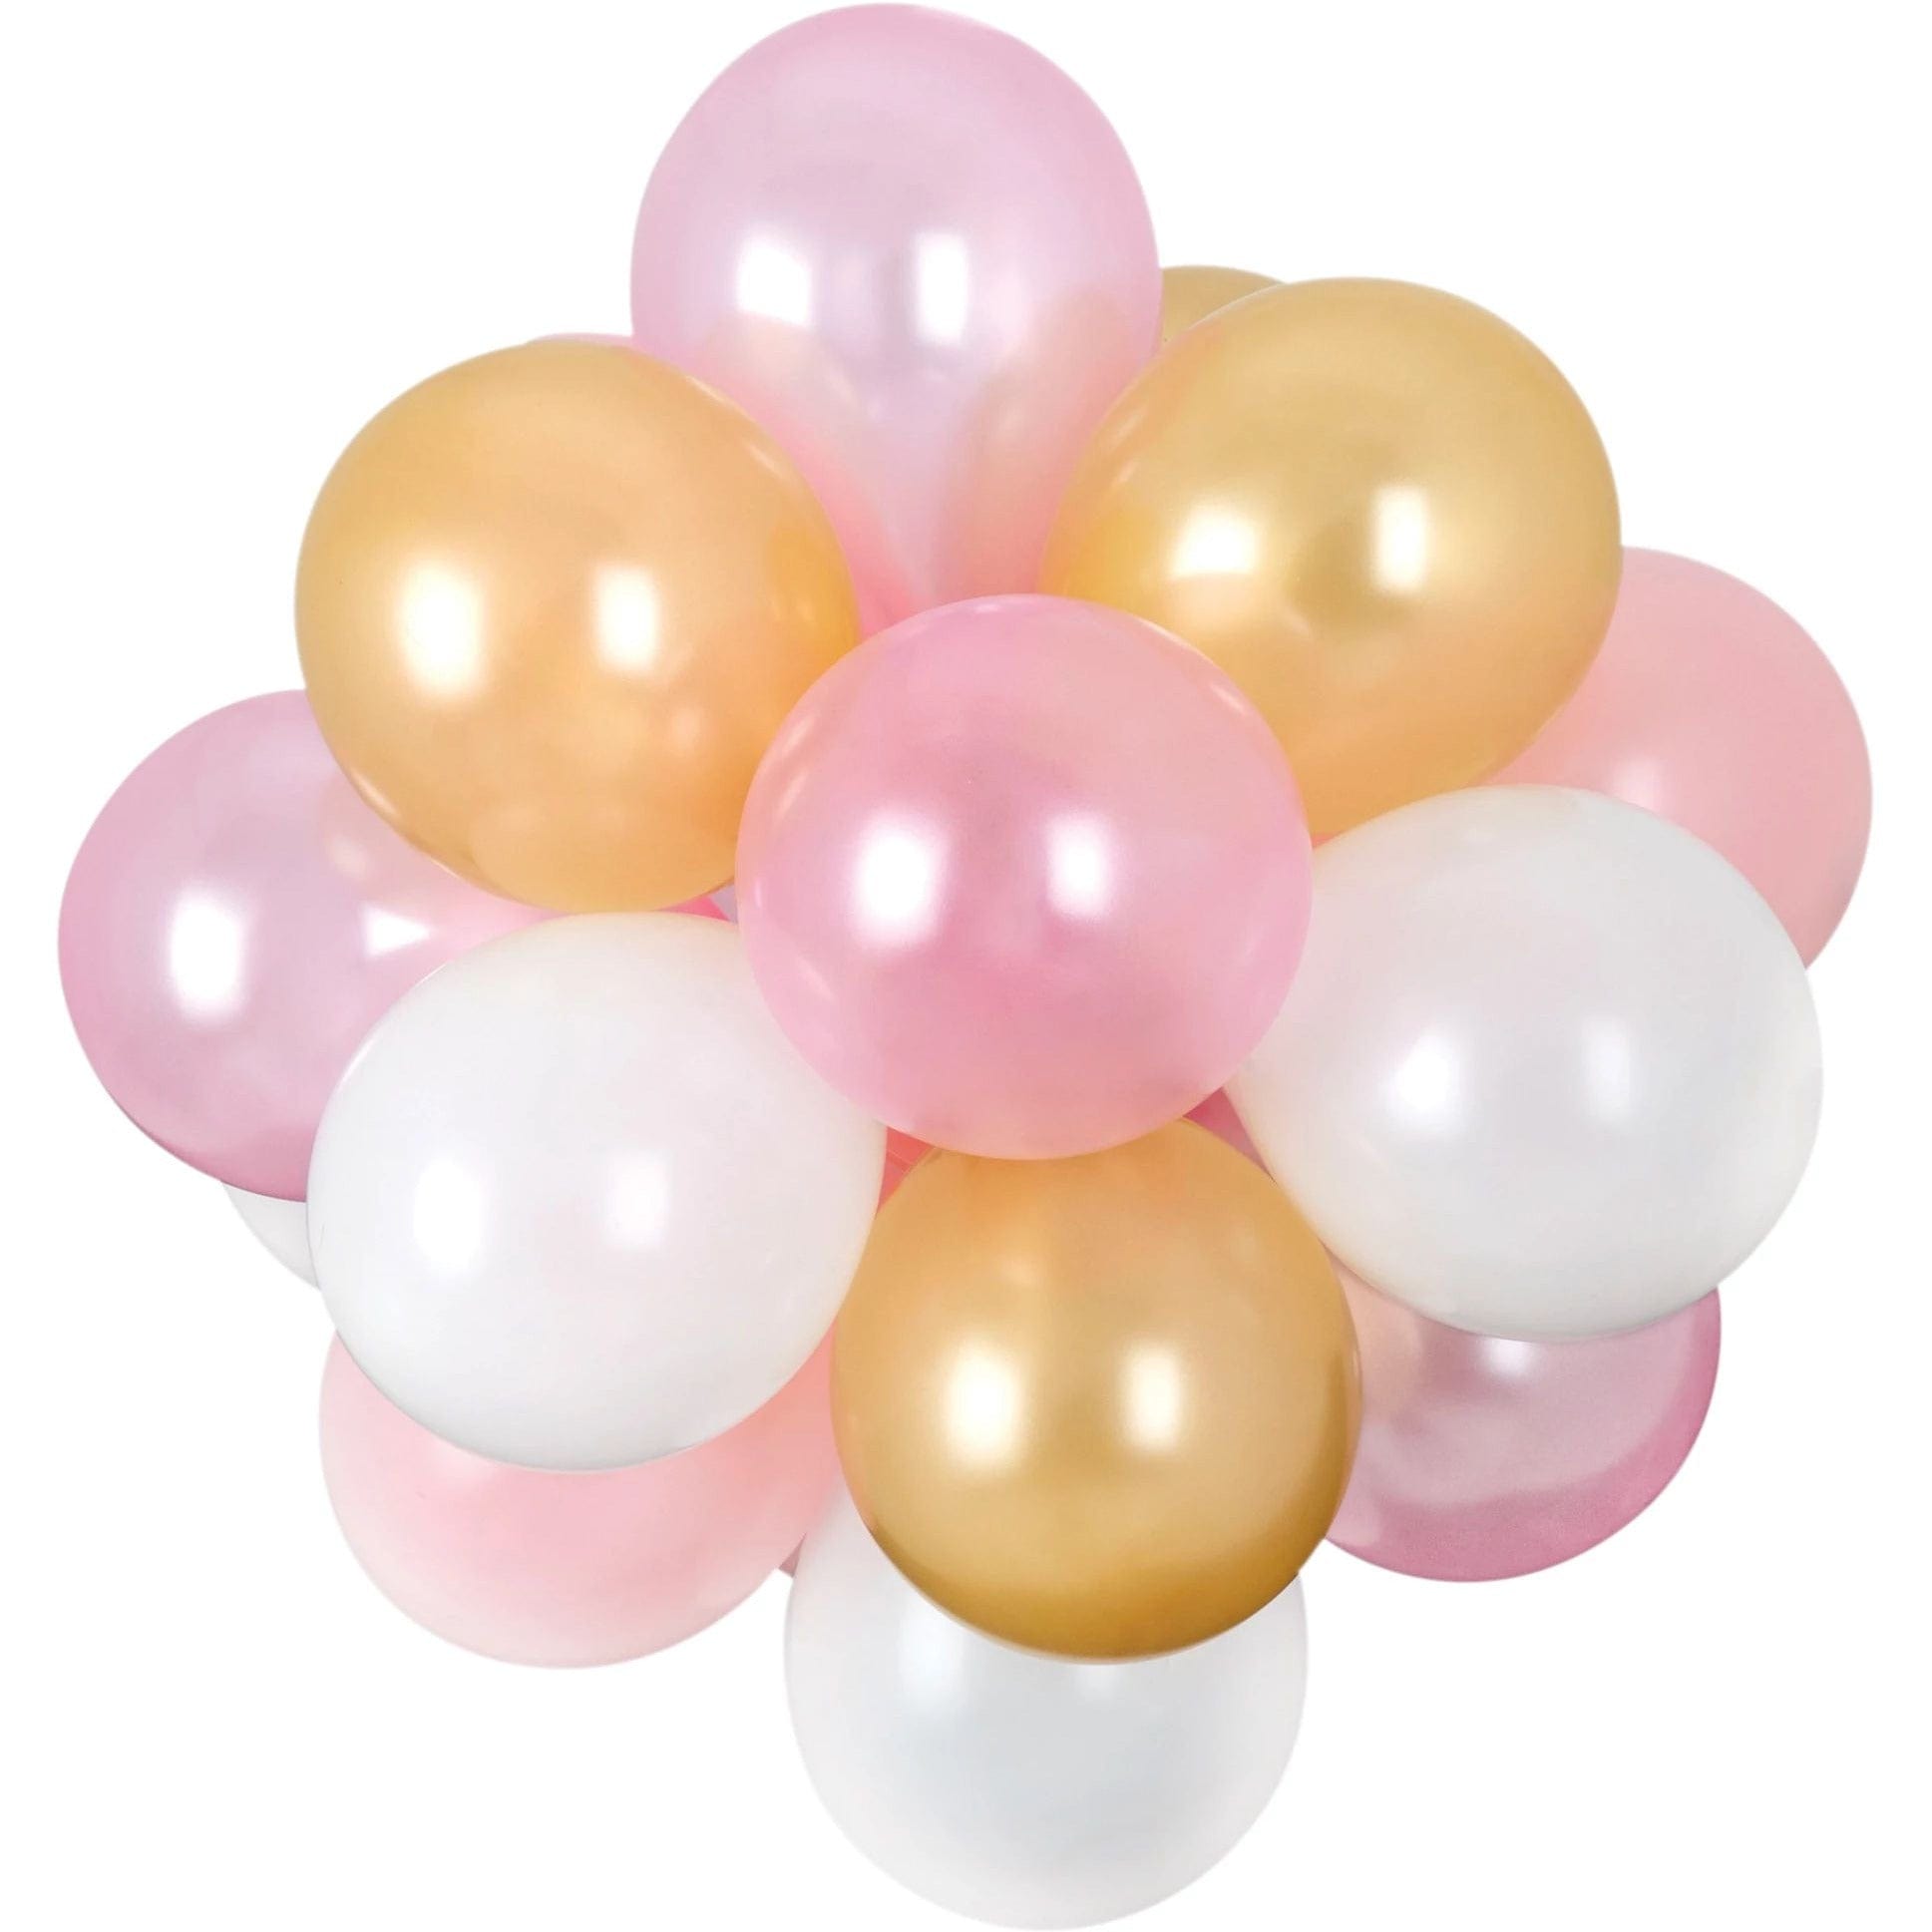 Amscan BALLOONS Air-Filled Latex Balloon Chandelier - Pastel Pink